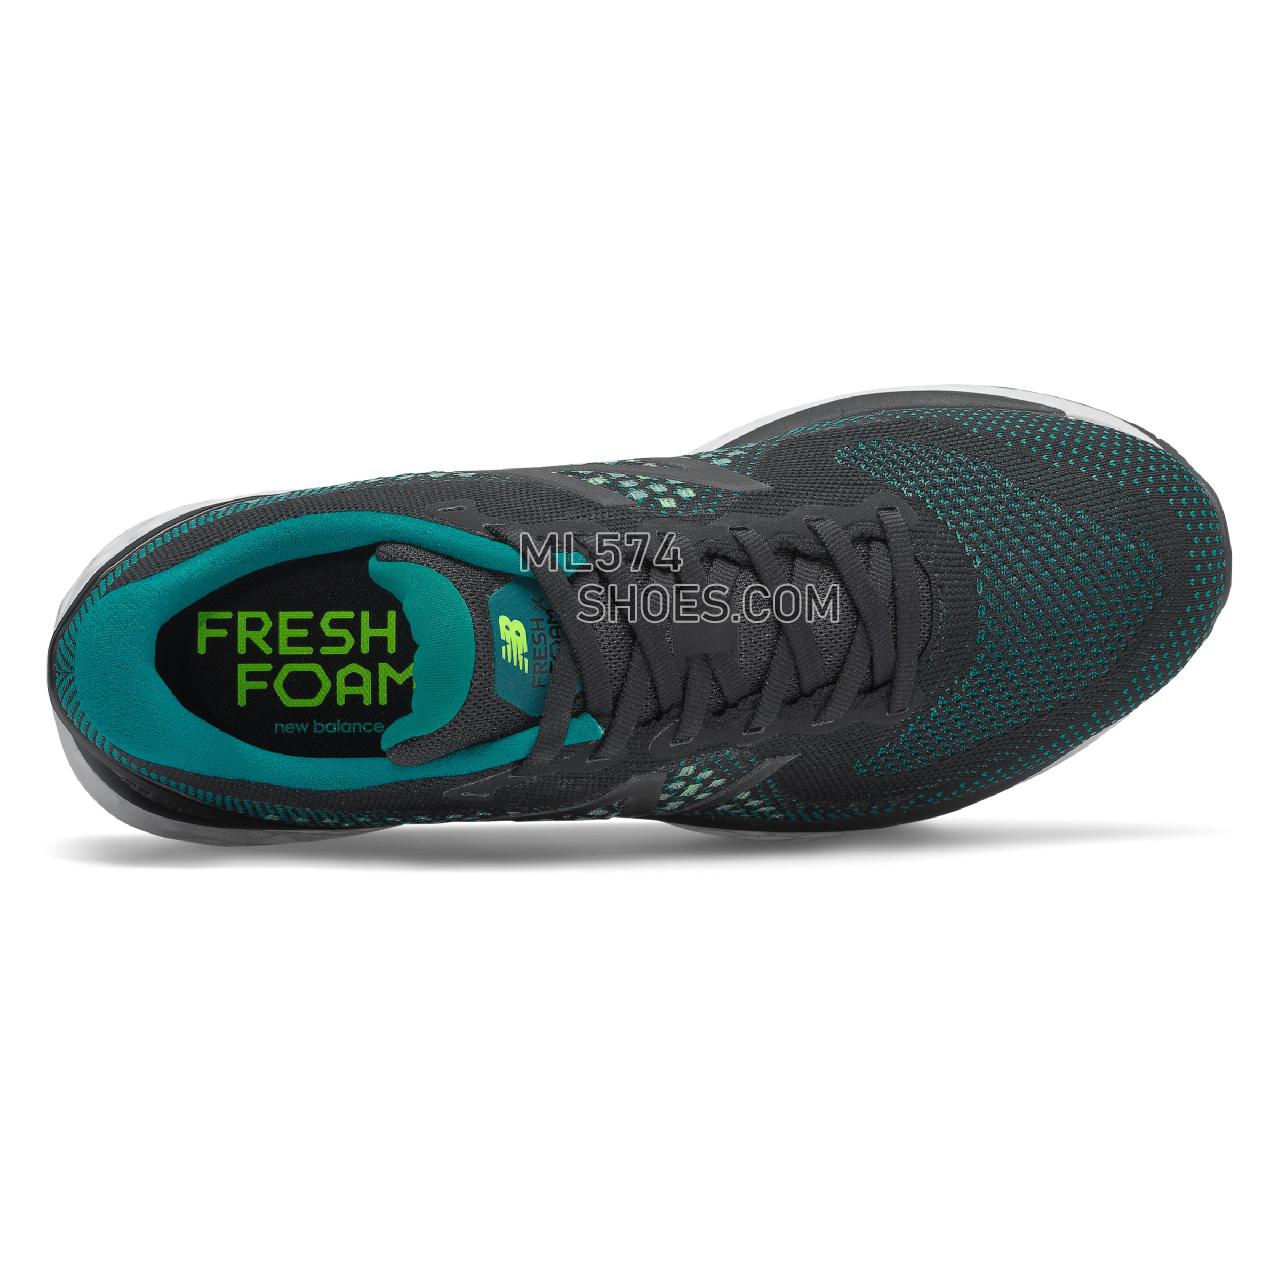 New Balance Fresh Foam 880v10 - Men's 800 Series - Black with Team Teal and Lime Glo - M880F10